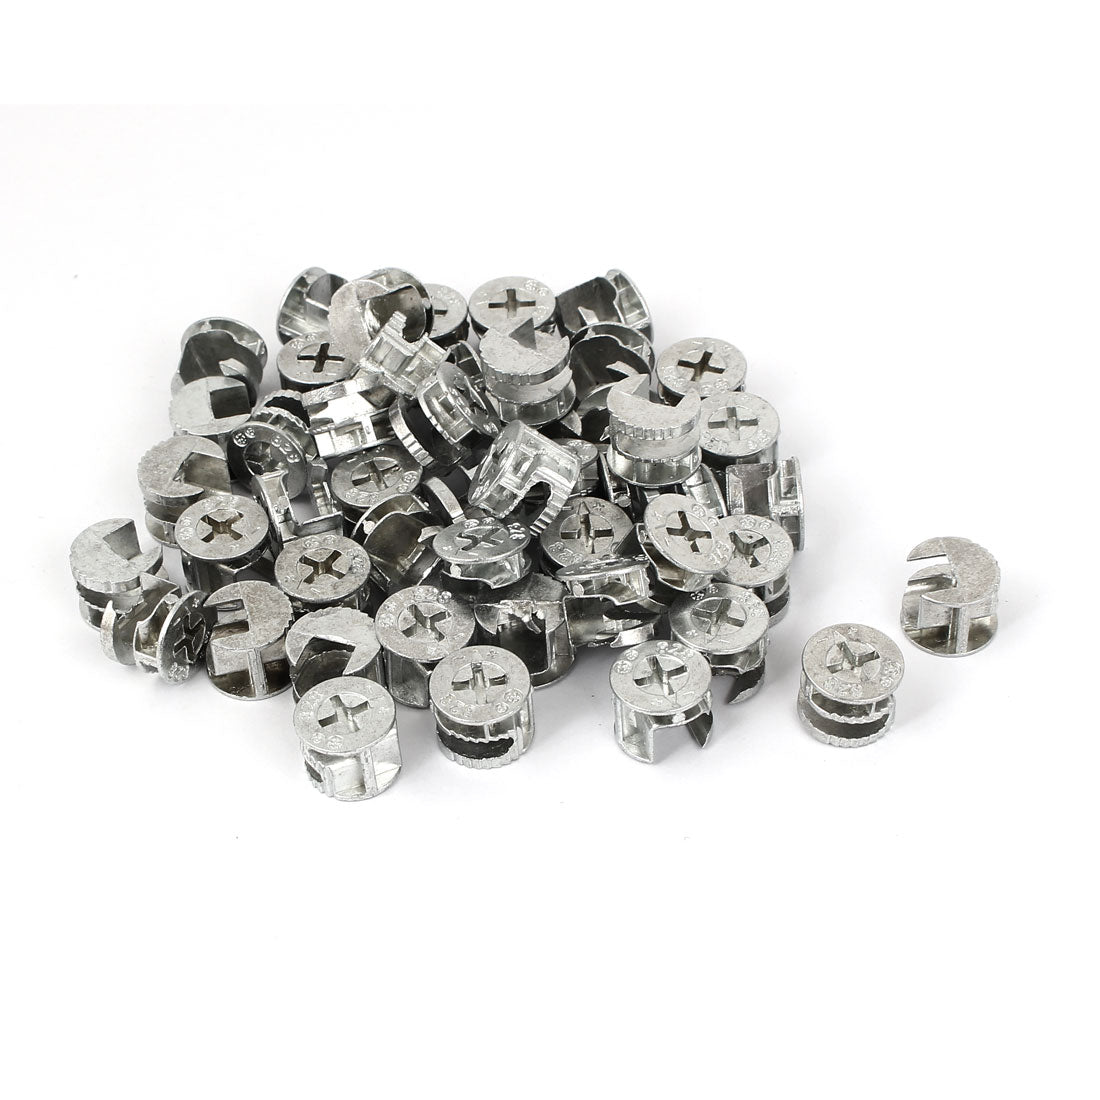 uxcell Uxcell 15mm Diameter Furniture Eccentric Cam Connecting Fittings 50pcs